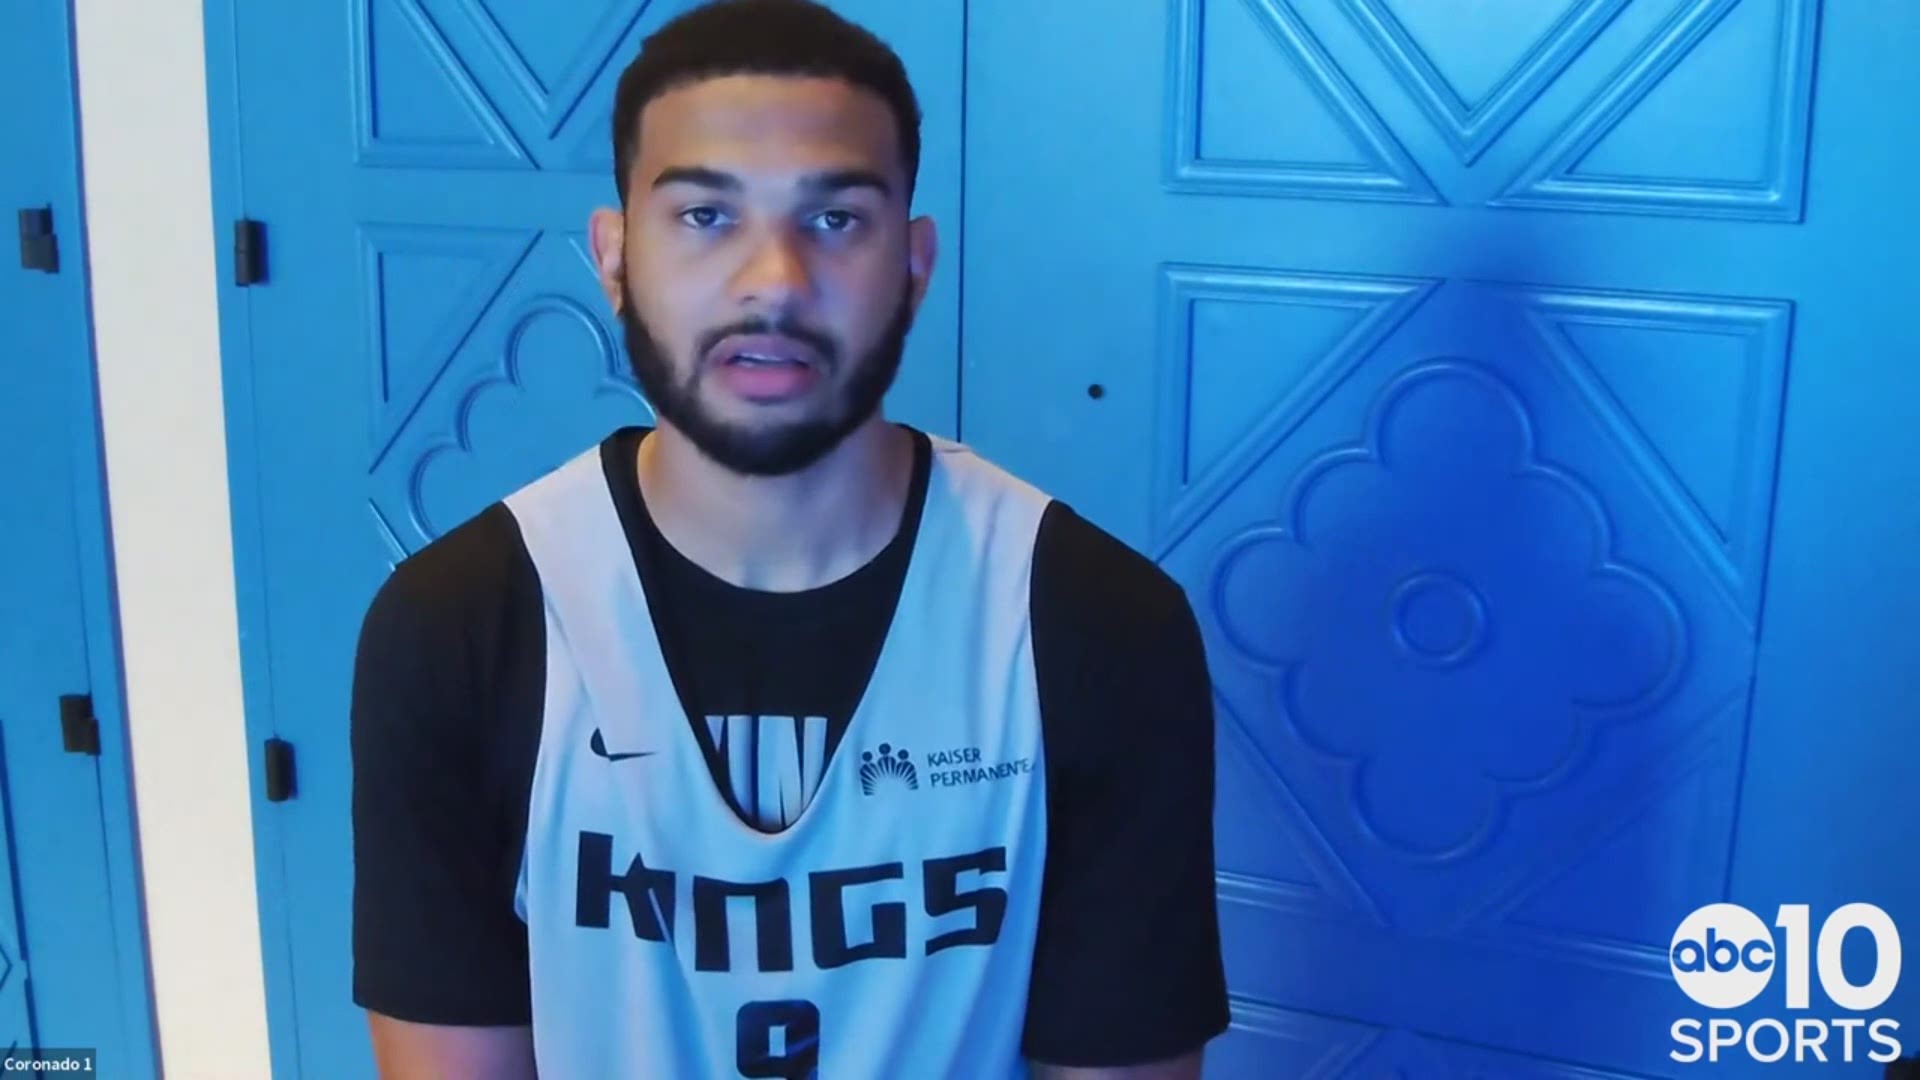 Sacramento Kings point guard Cory Joseph talks about his social justice message for his jersey during the NBA restart & picking up where the team left off.